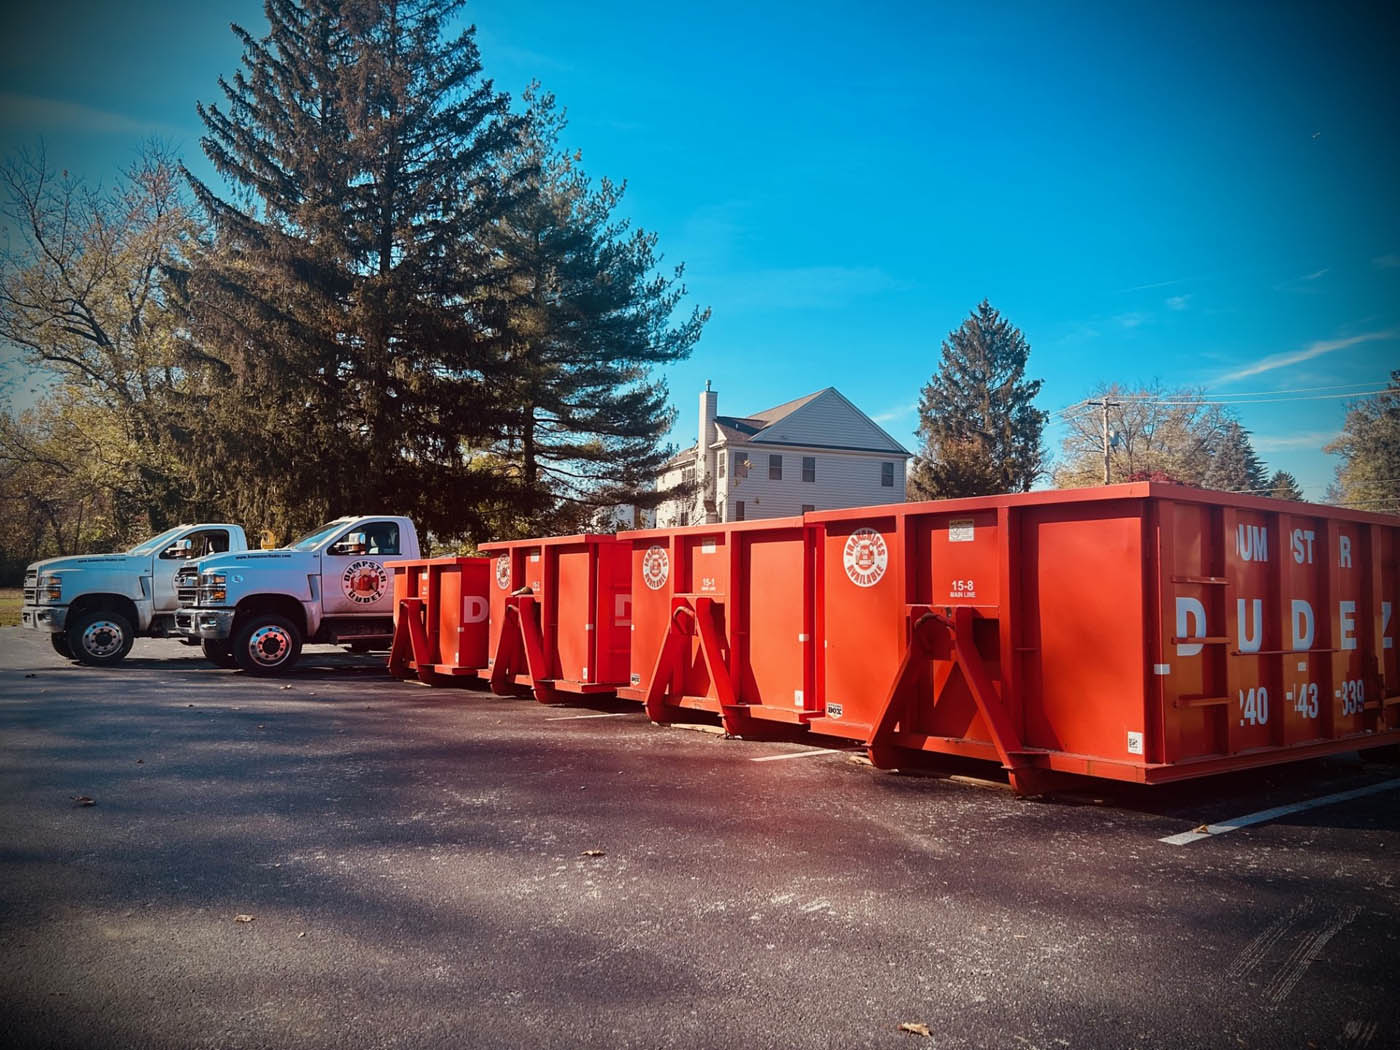 A line of different sized dumpsters from Dumpster Dudez.